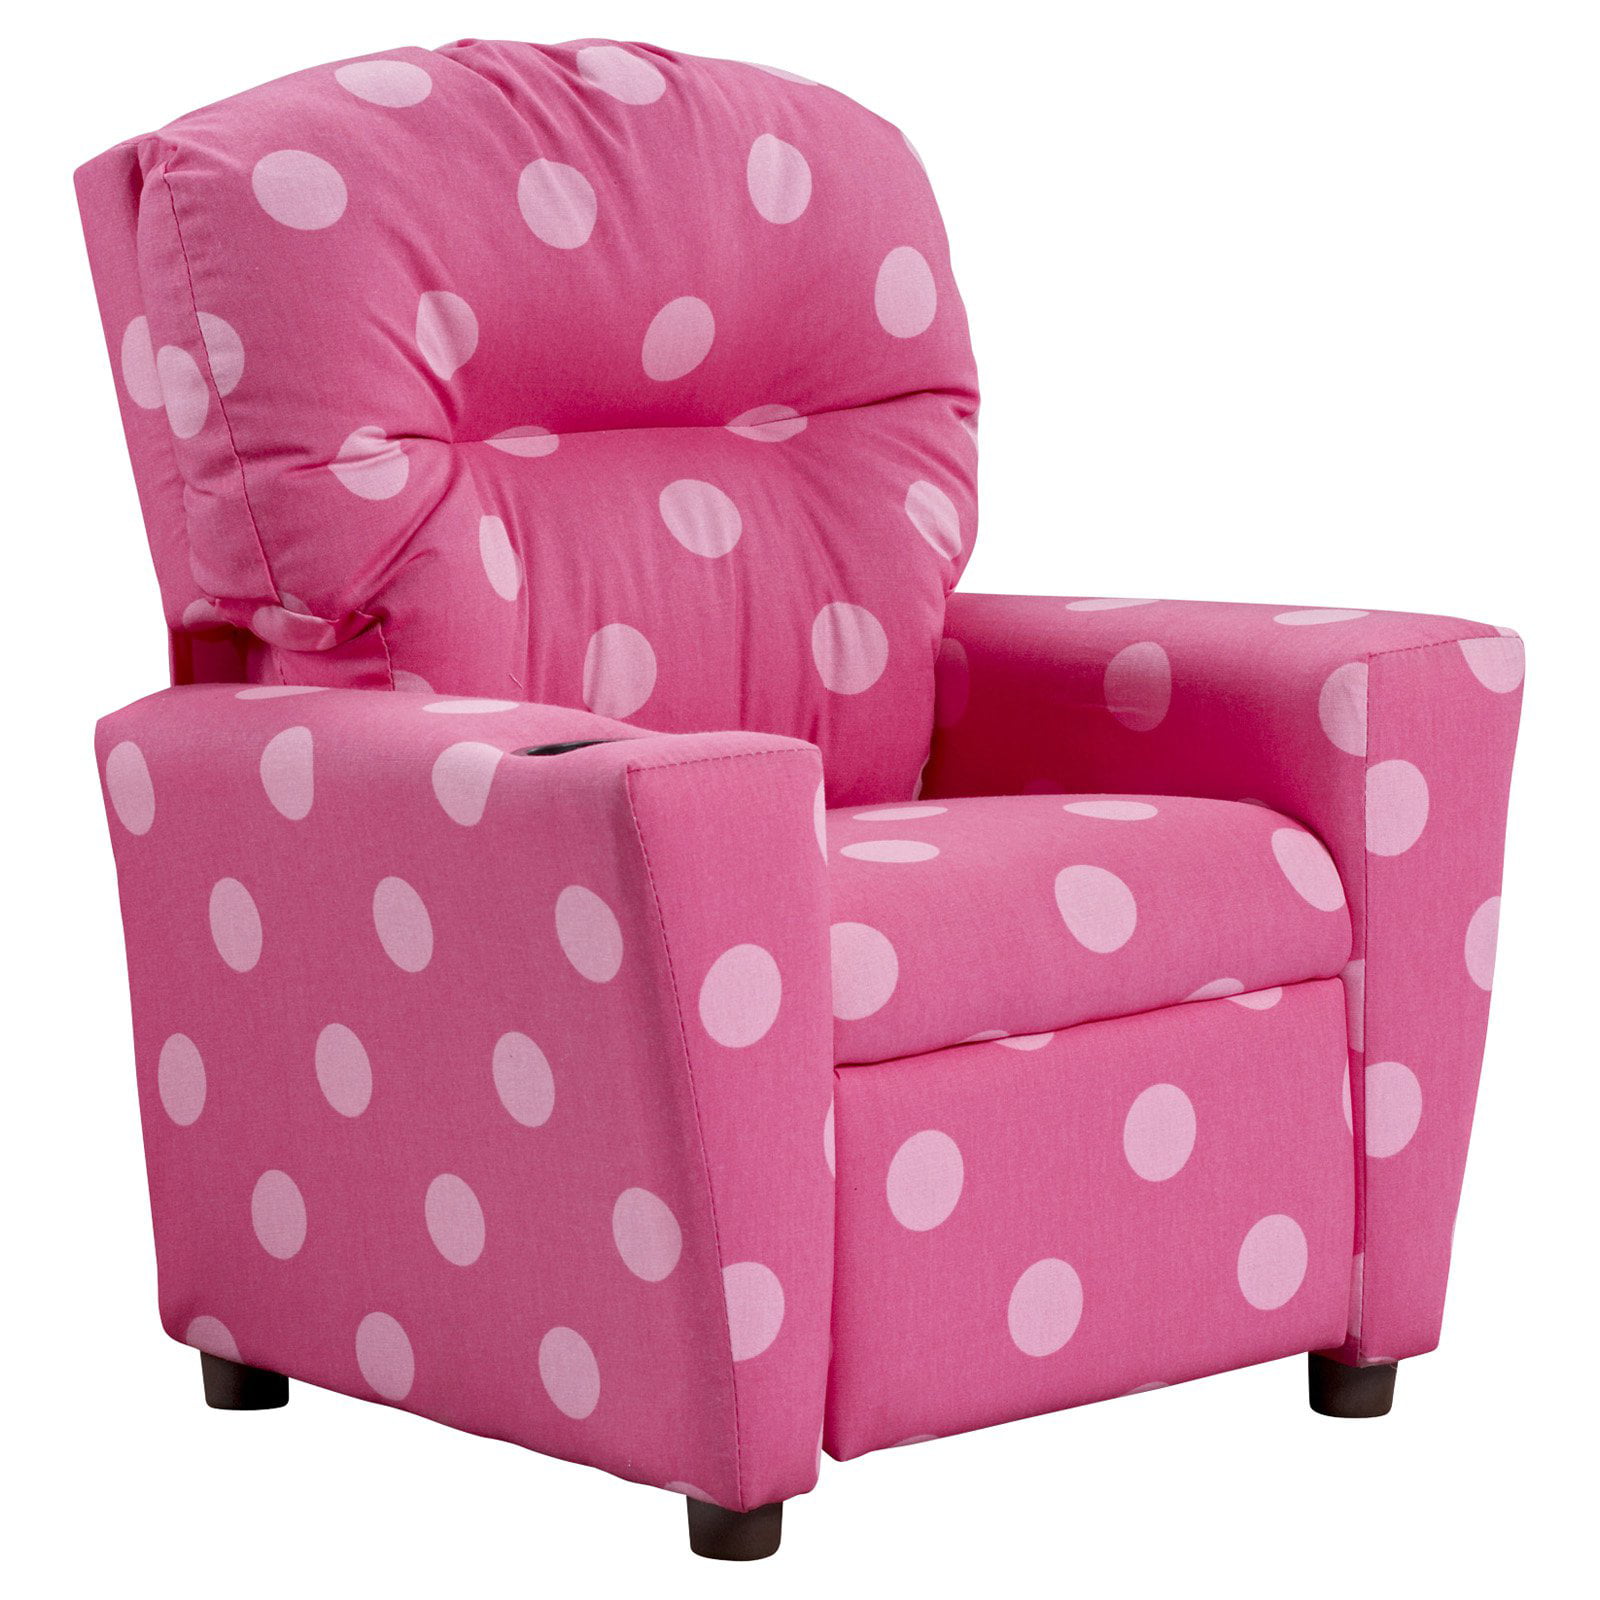 childs recliner chair costco        <h3 class=